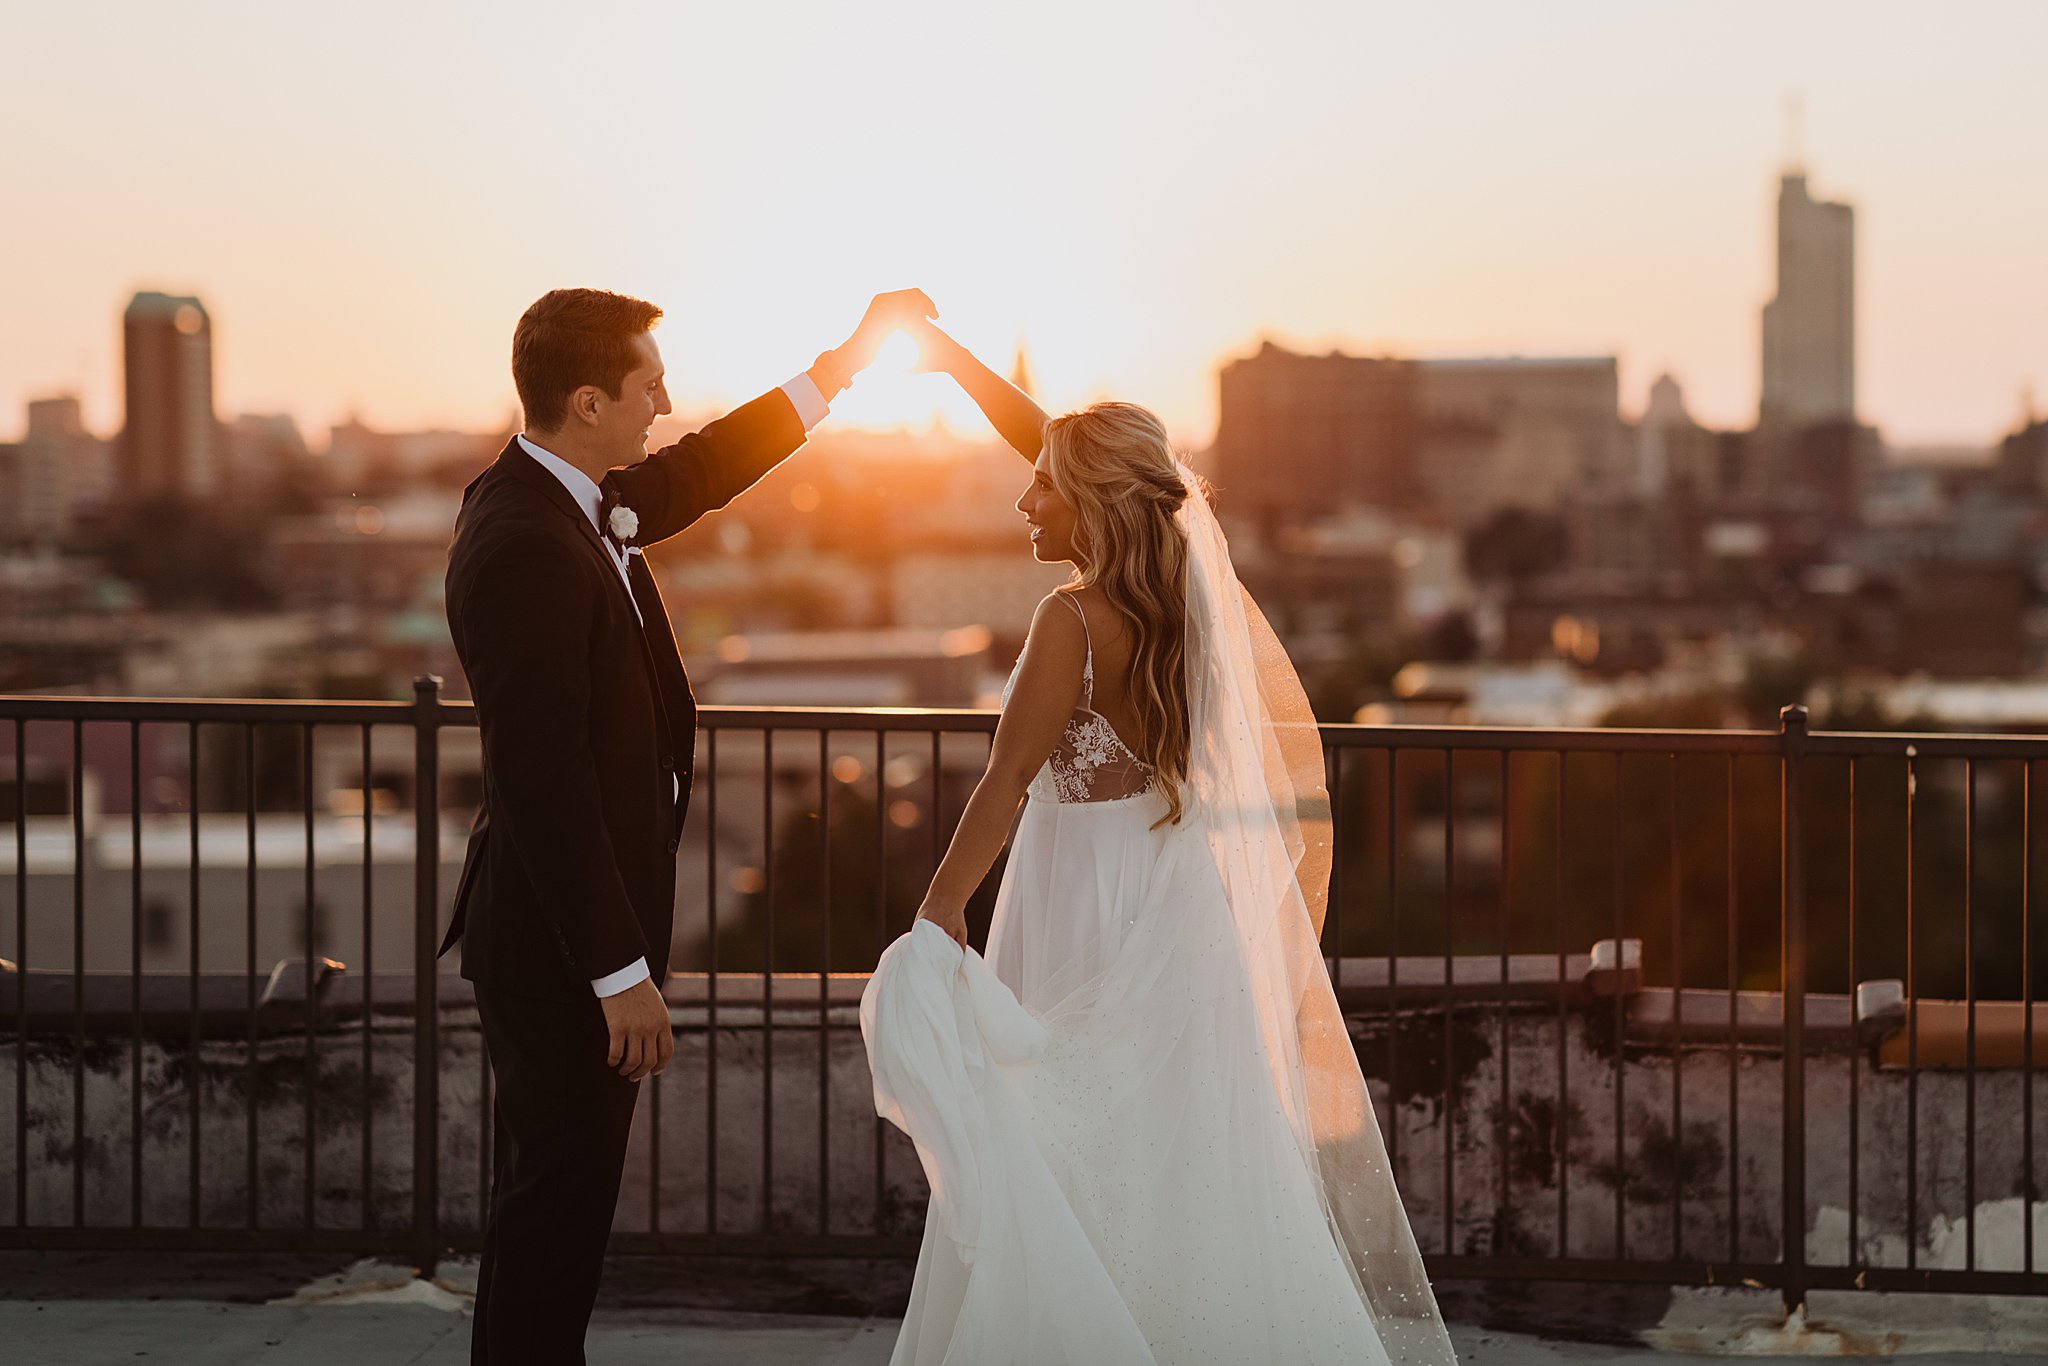 Bride and Groom Dancing on Rooftop in STL at Sunset